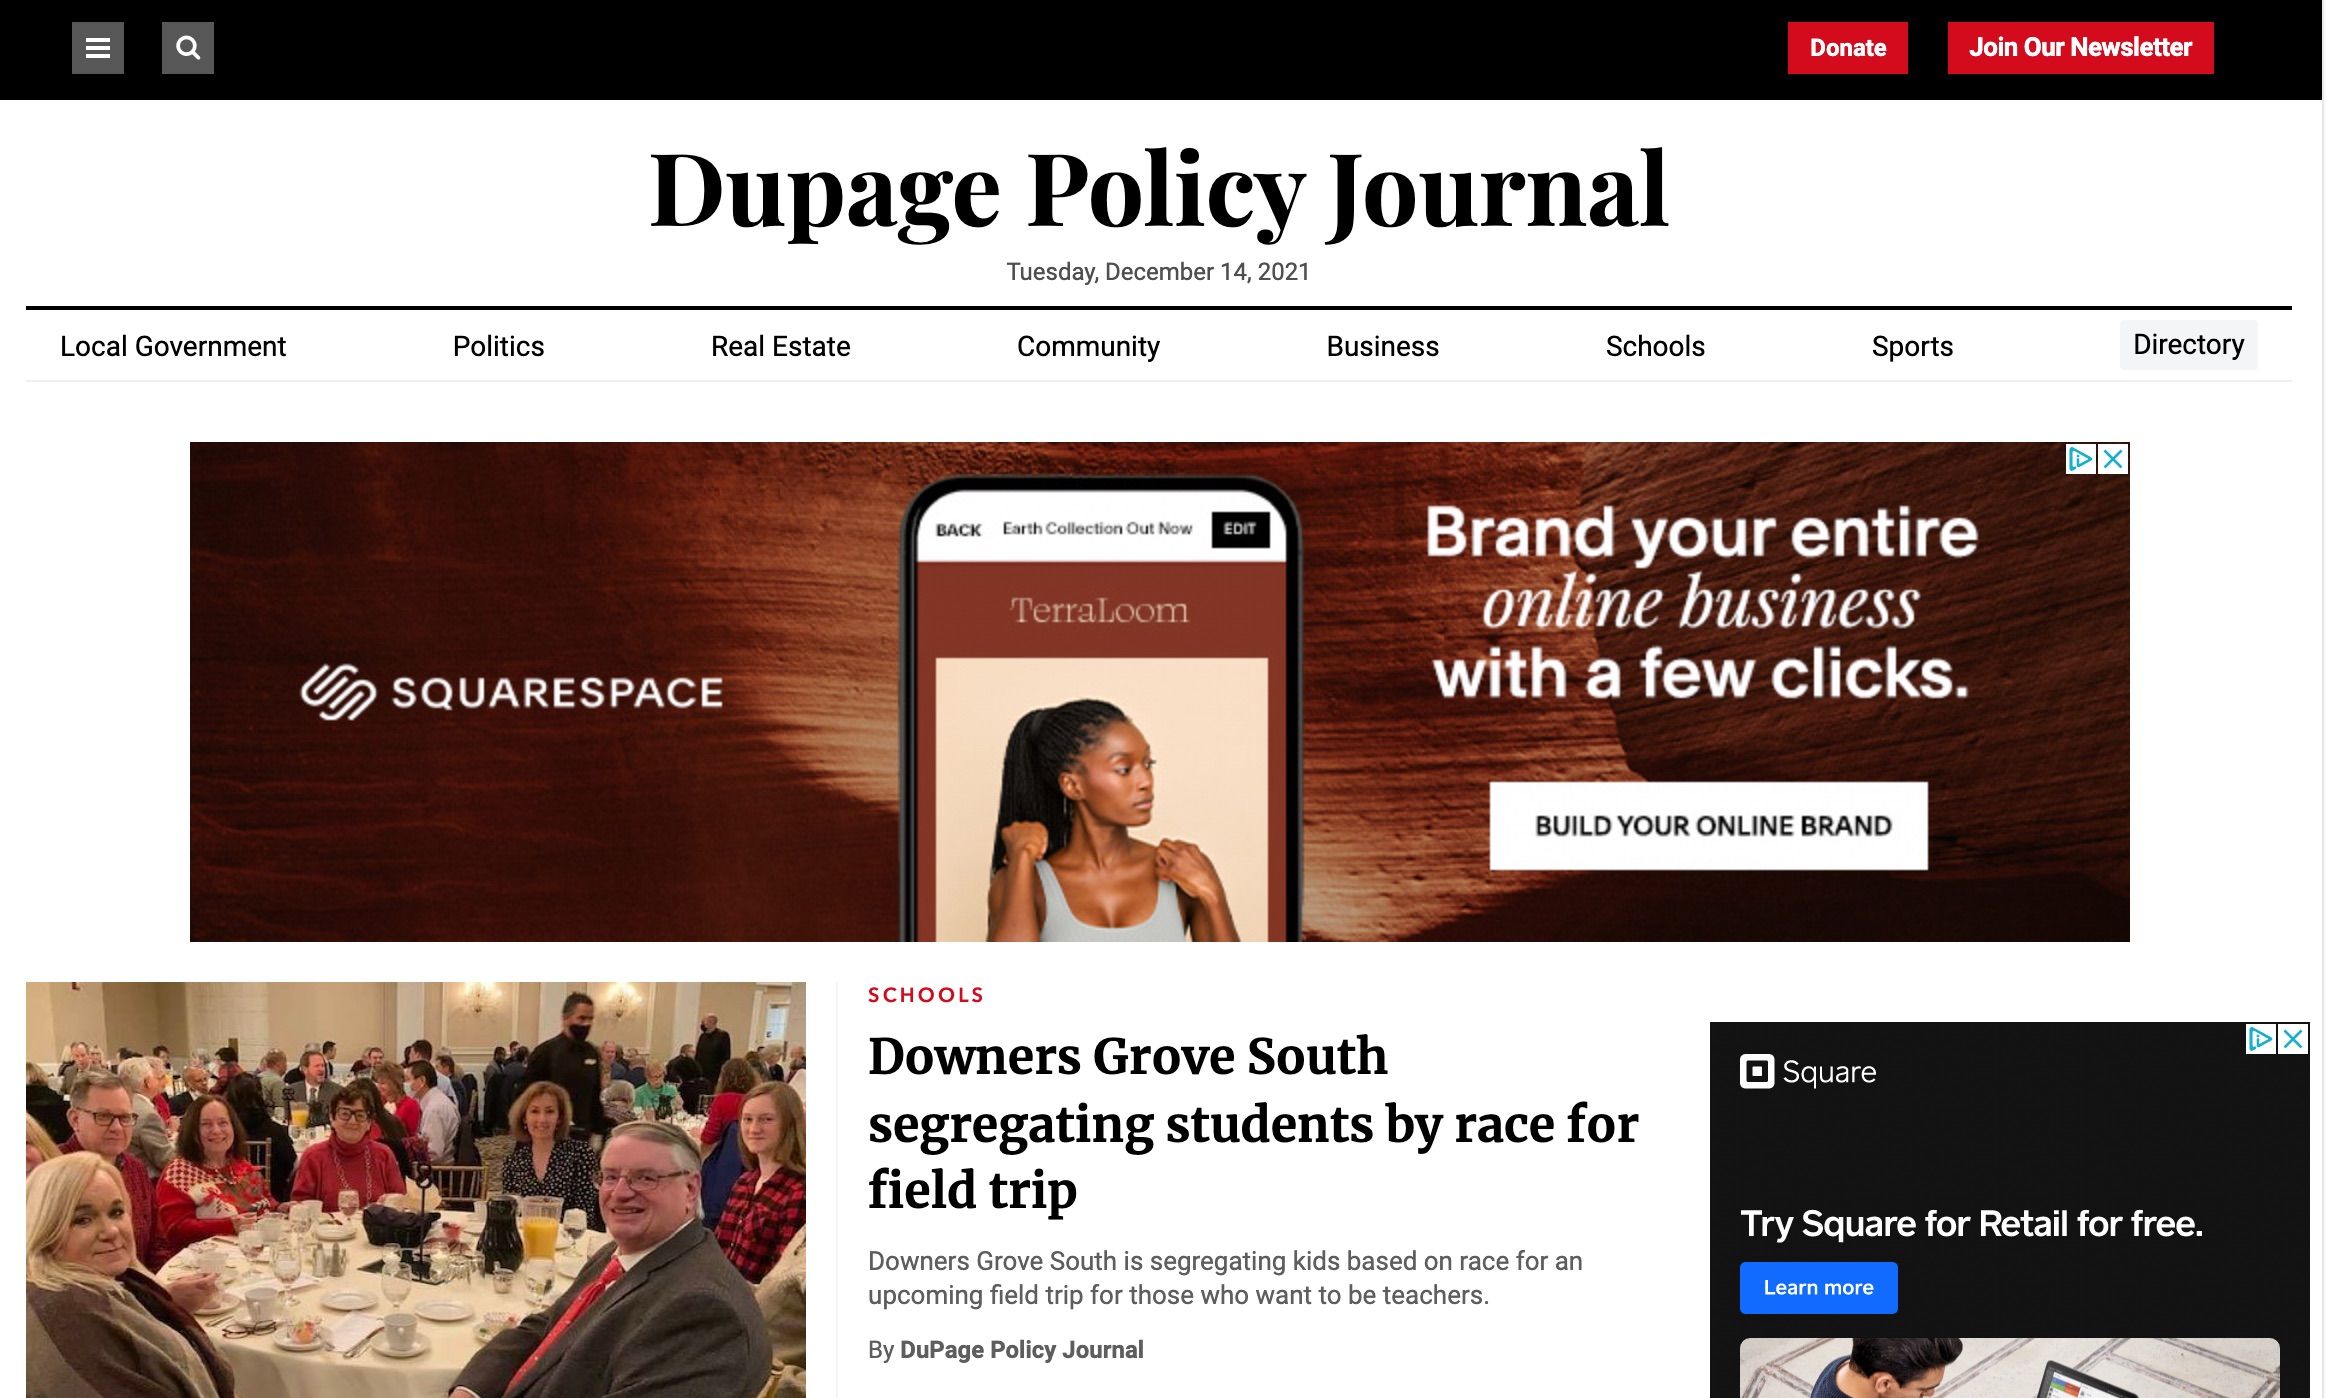 Front page of the digital dupage policy journal.